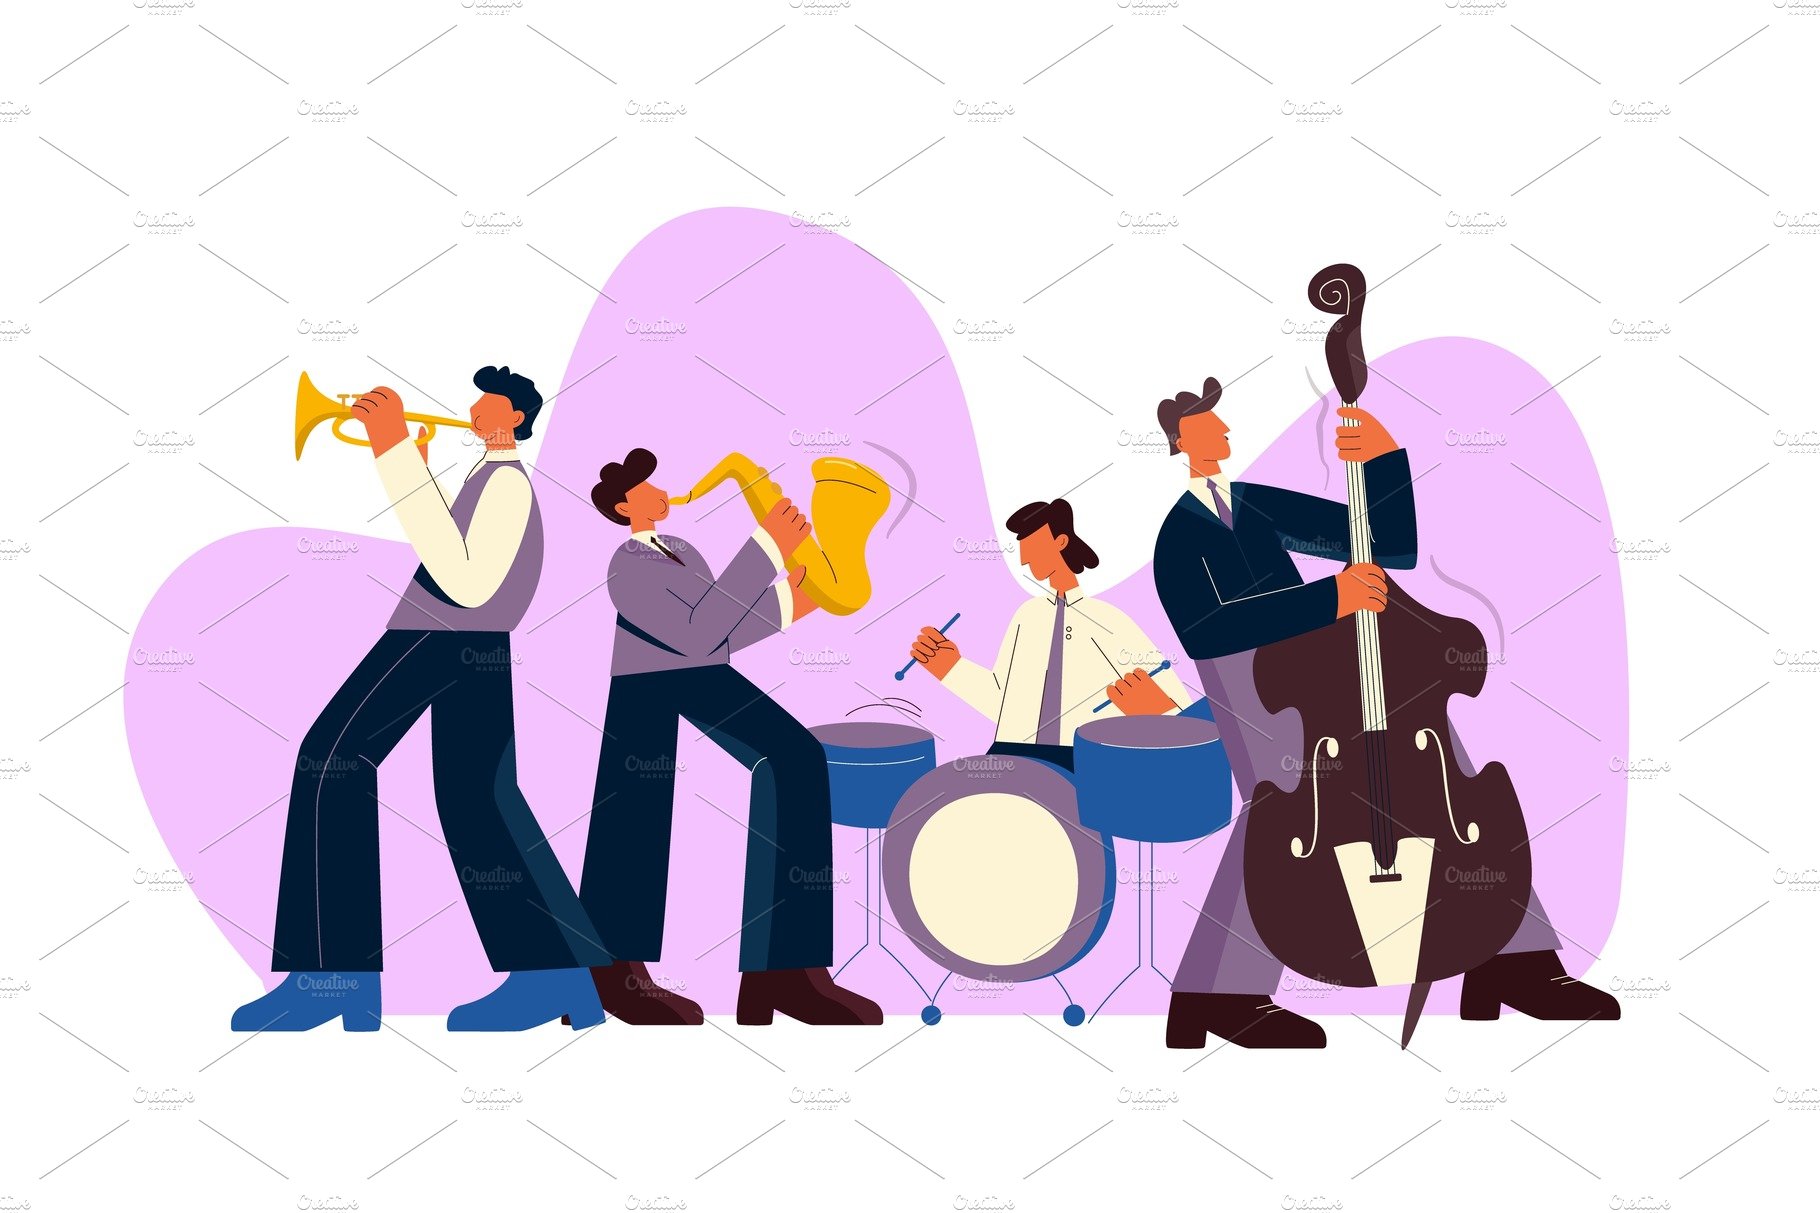 Cartoon jazz band play music on cover image.